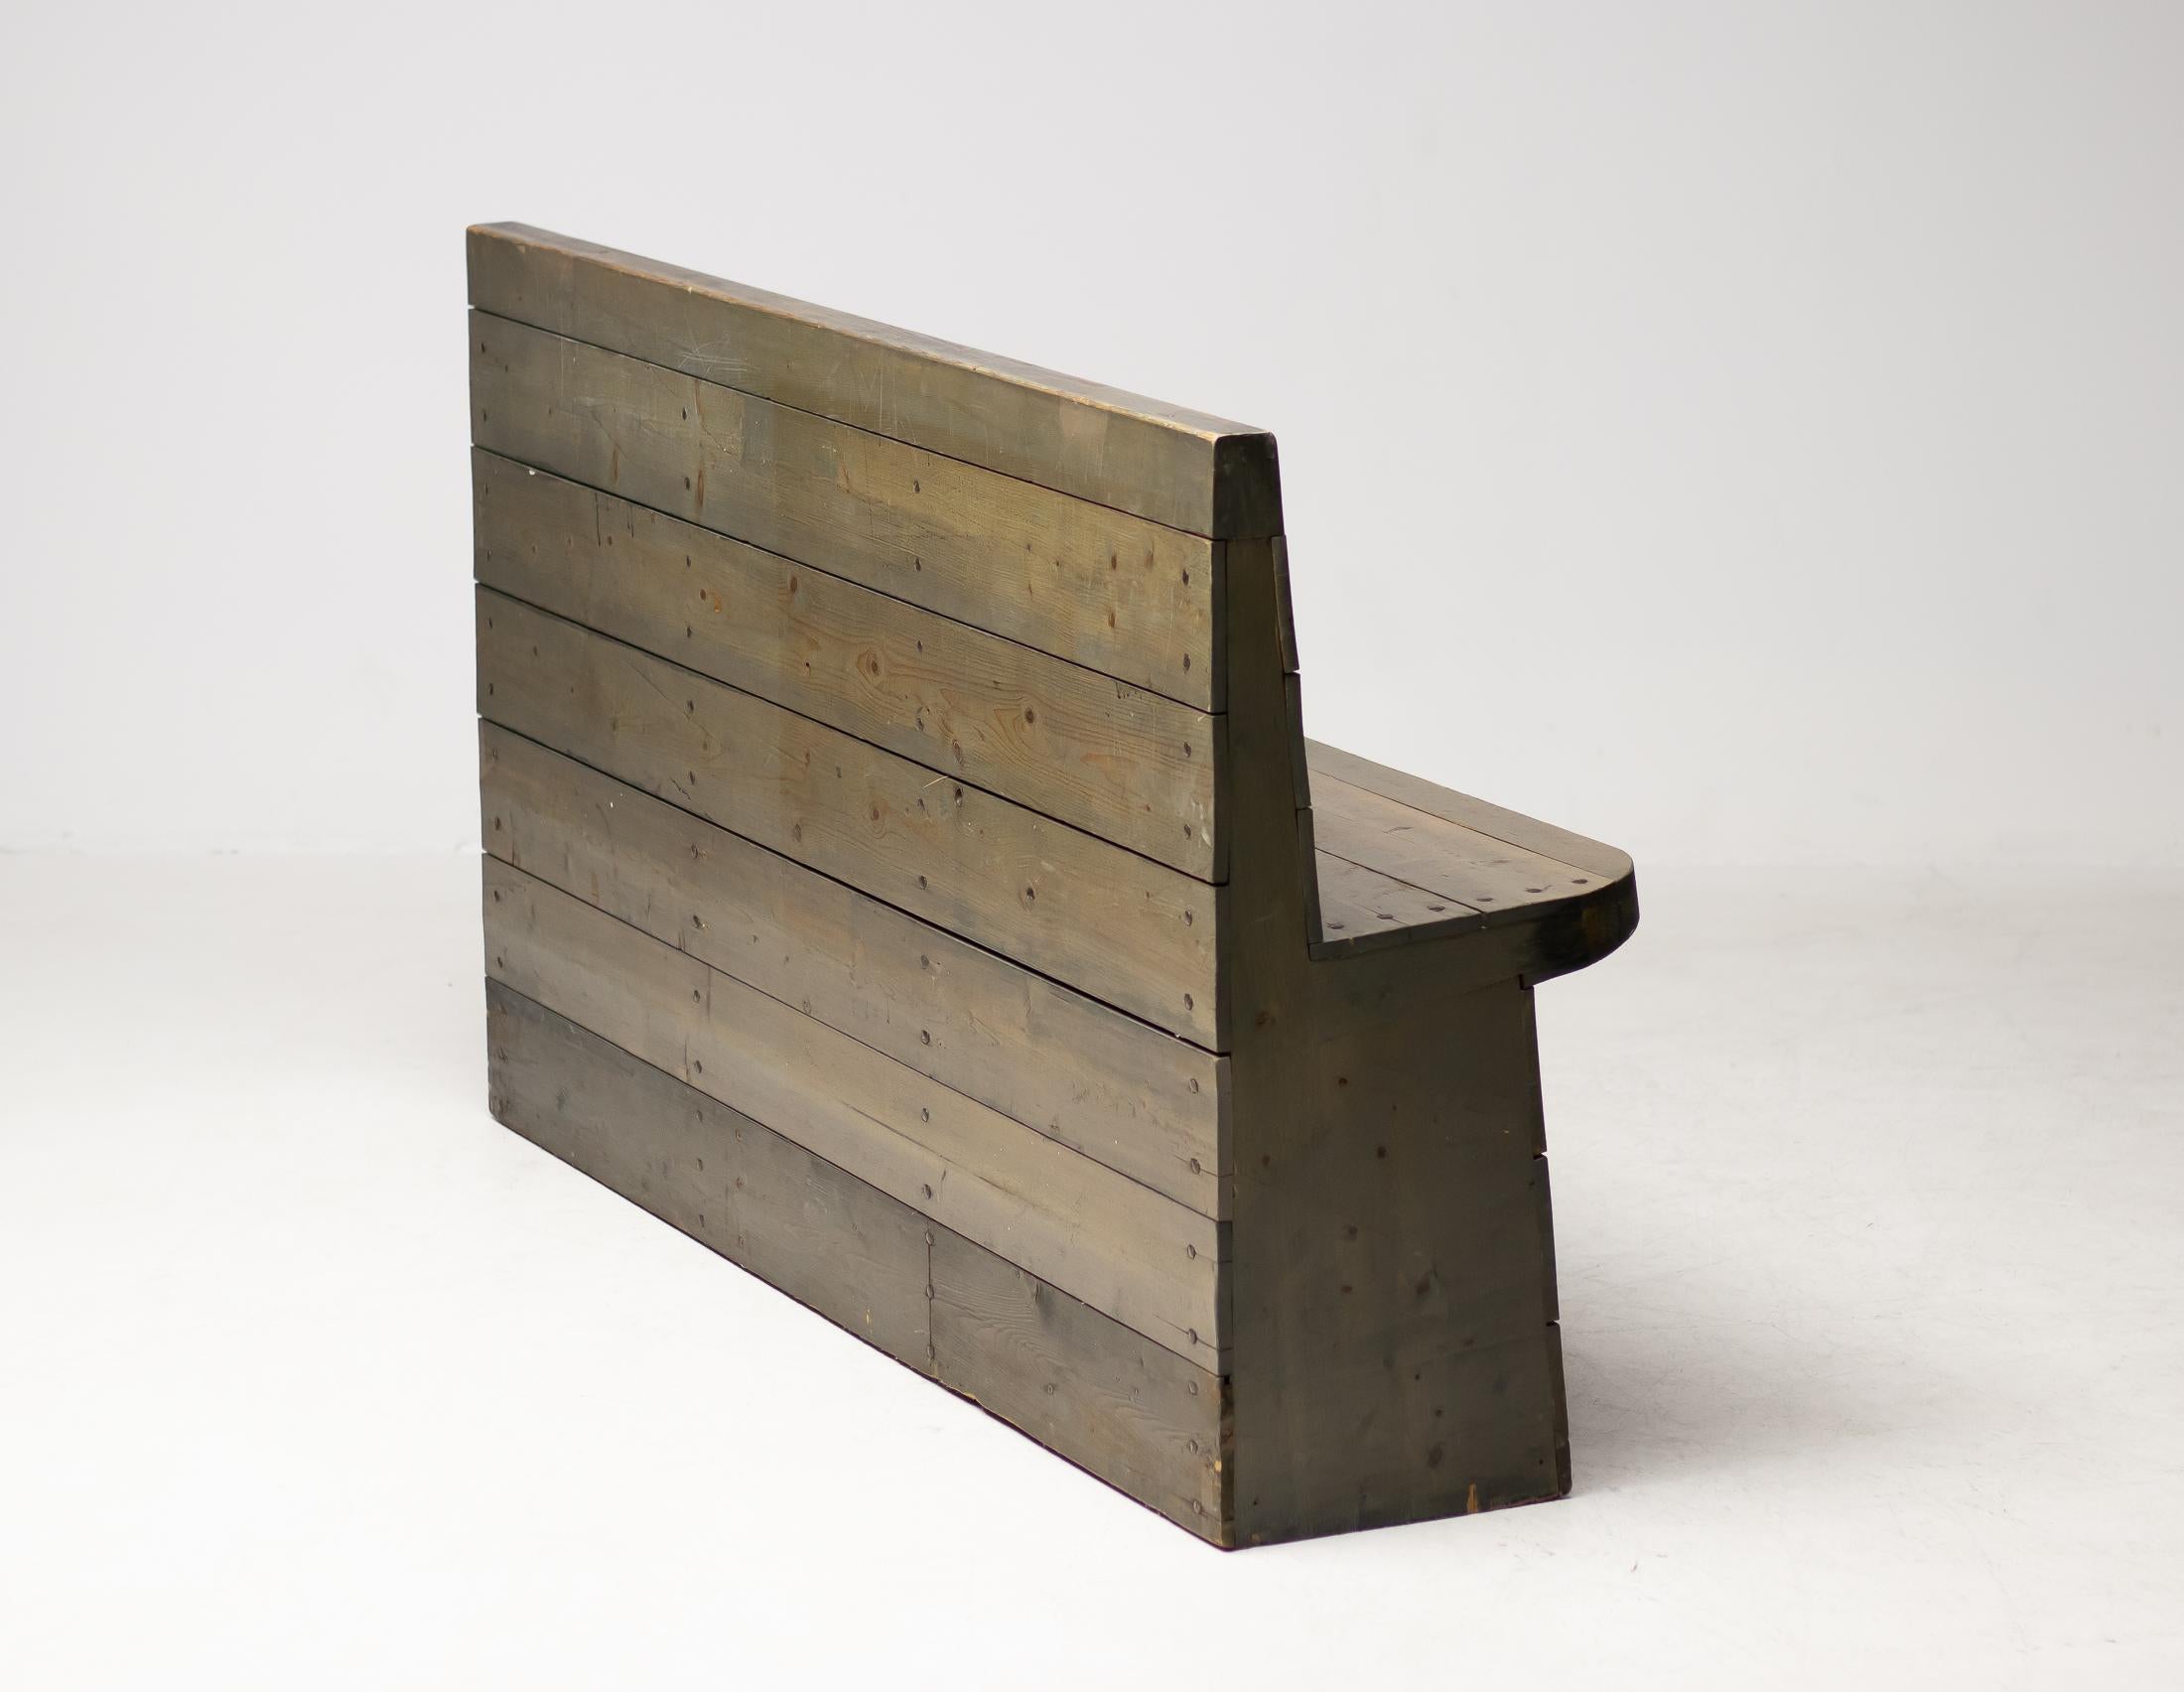 Rare bench designed by Dom Hans van der Laan and executed by Jan de Jong for the Sint-Willibrorduskerk Almelo, 1964. This bench originates from the church that had mostly benches with steps at the back. Very few of those benches survived, and this